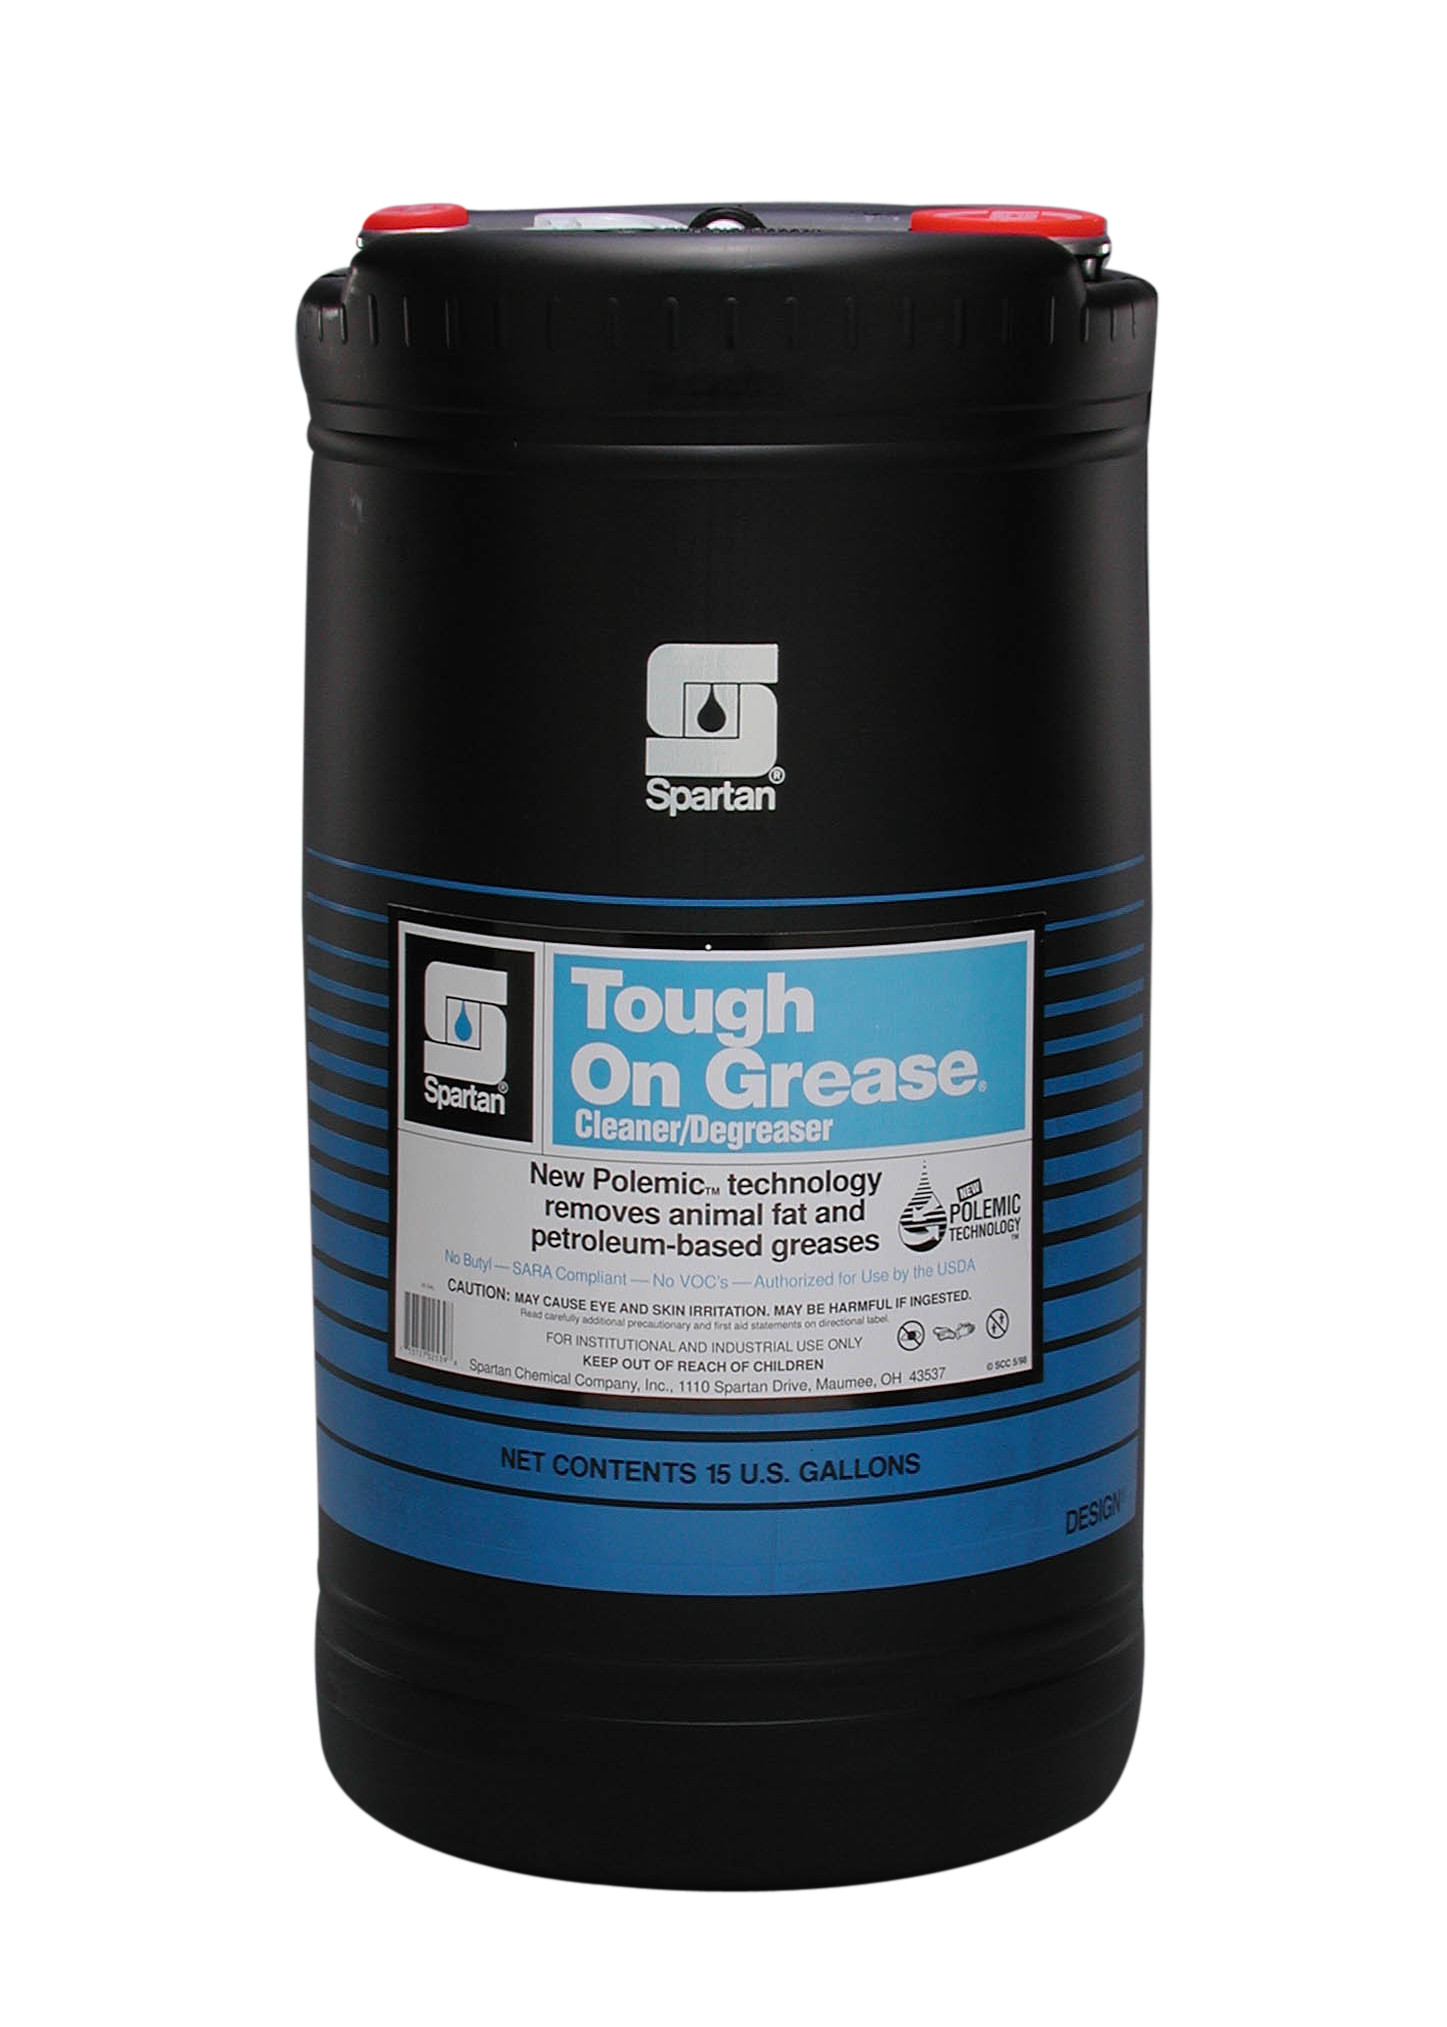 Spartan Chemical Company Tough on Grease, 15 GAL DRUM